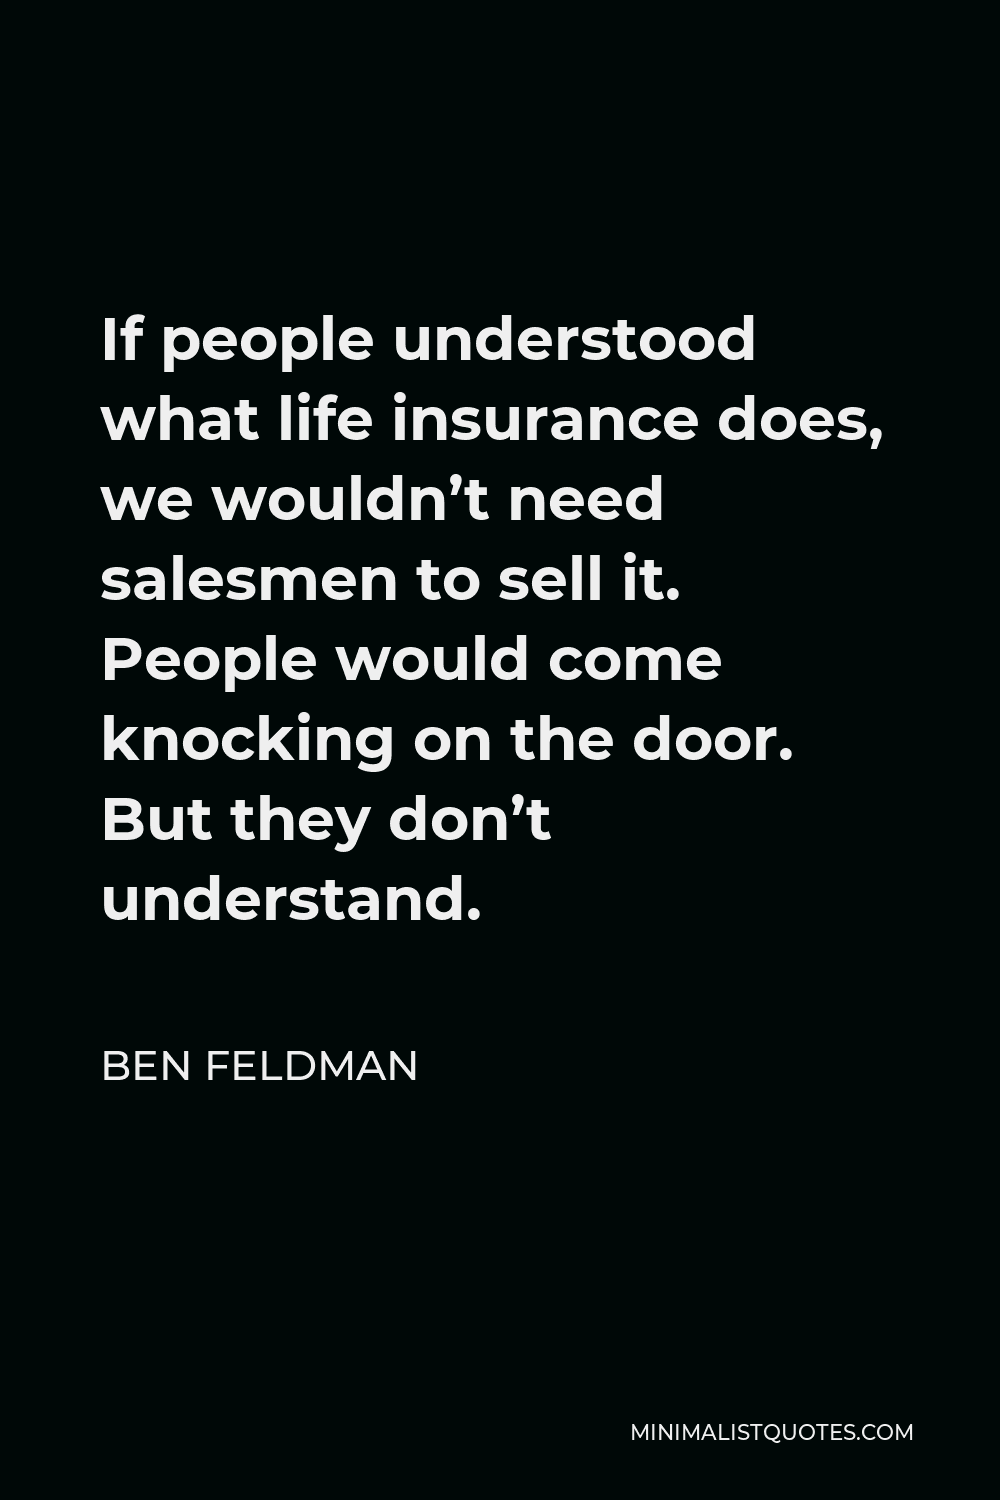 Ben Feldman Quote - If people understood what life insurance does, we wouldn’t need salesmen to sell it. People would come knocking on the door. But they don’t understand.